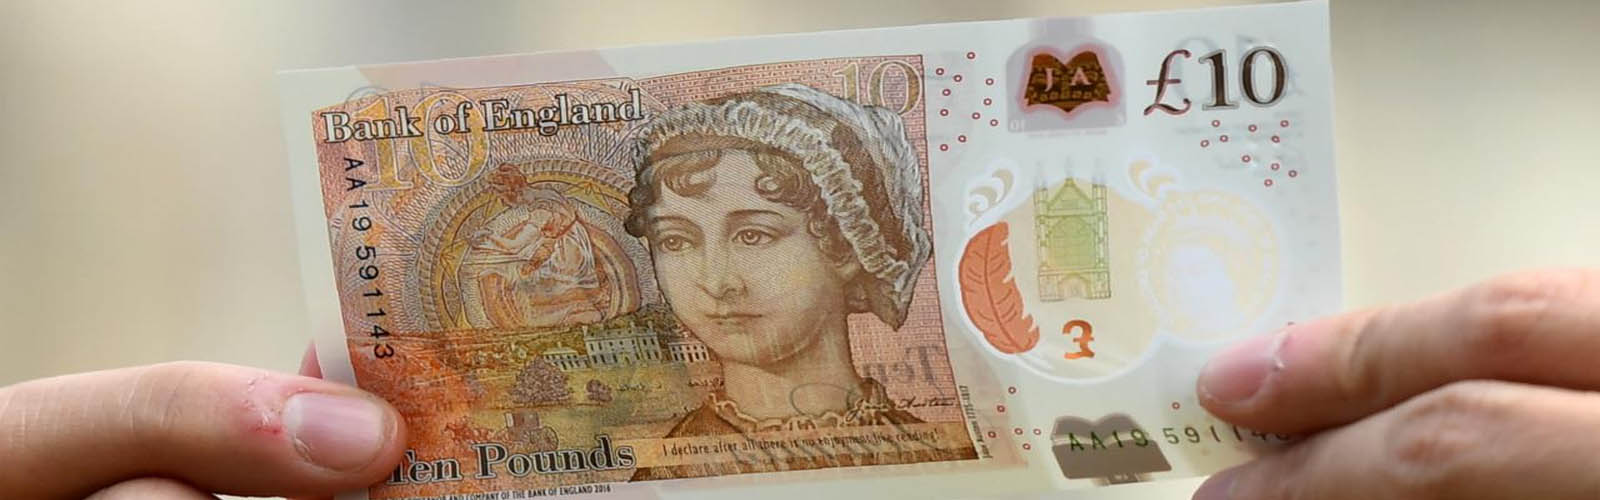 Jane Austen takes pride of place on Britain's new plastic tenner